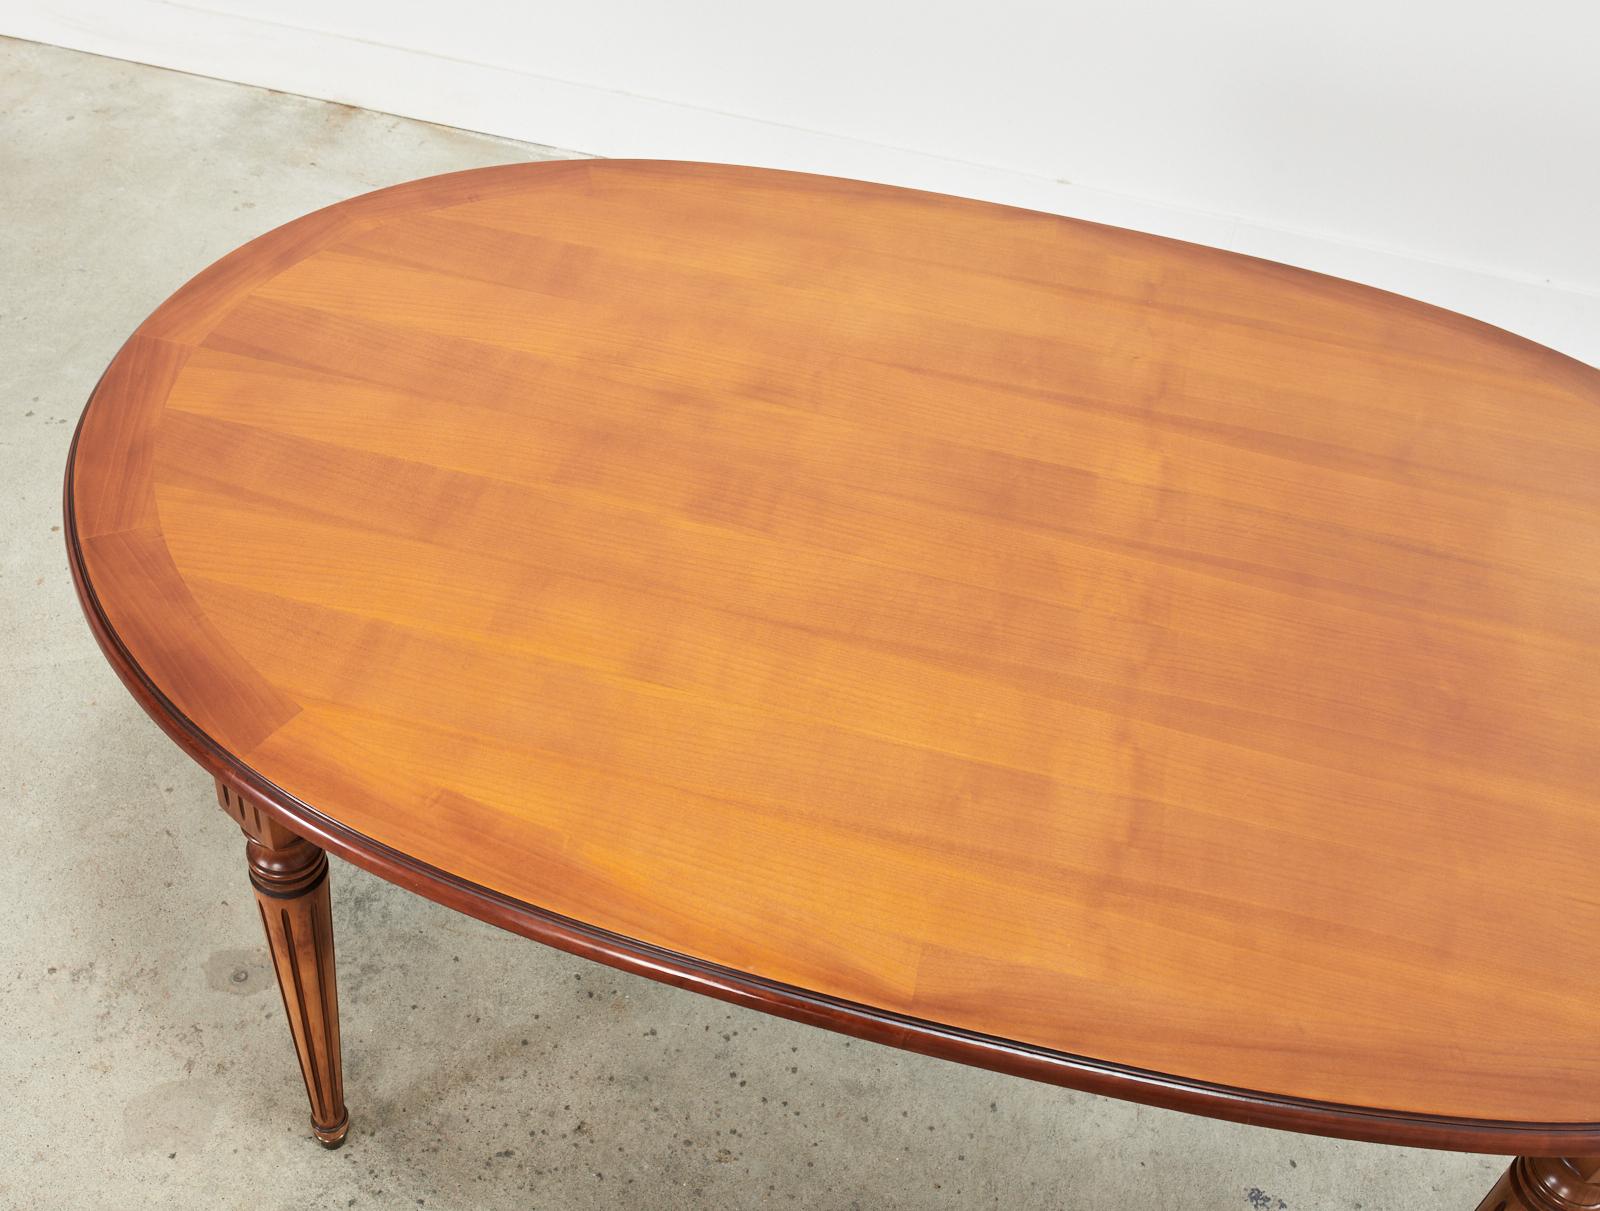 20th Century French Louis XVI Style Fruitwood Oval Dining Table with Leaves